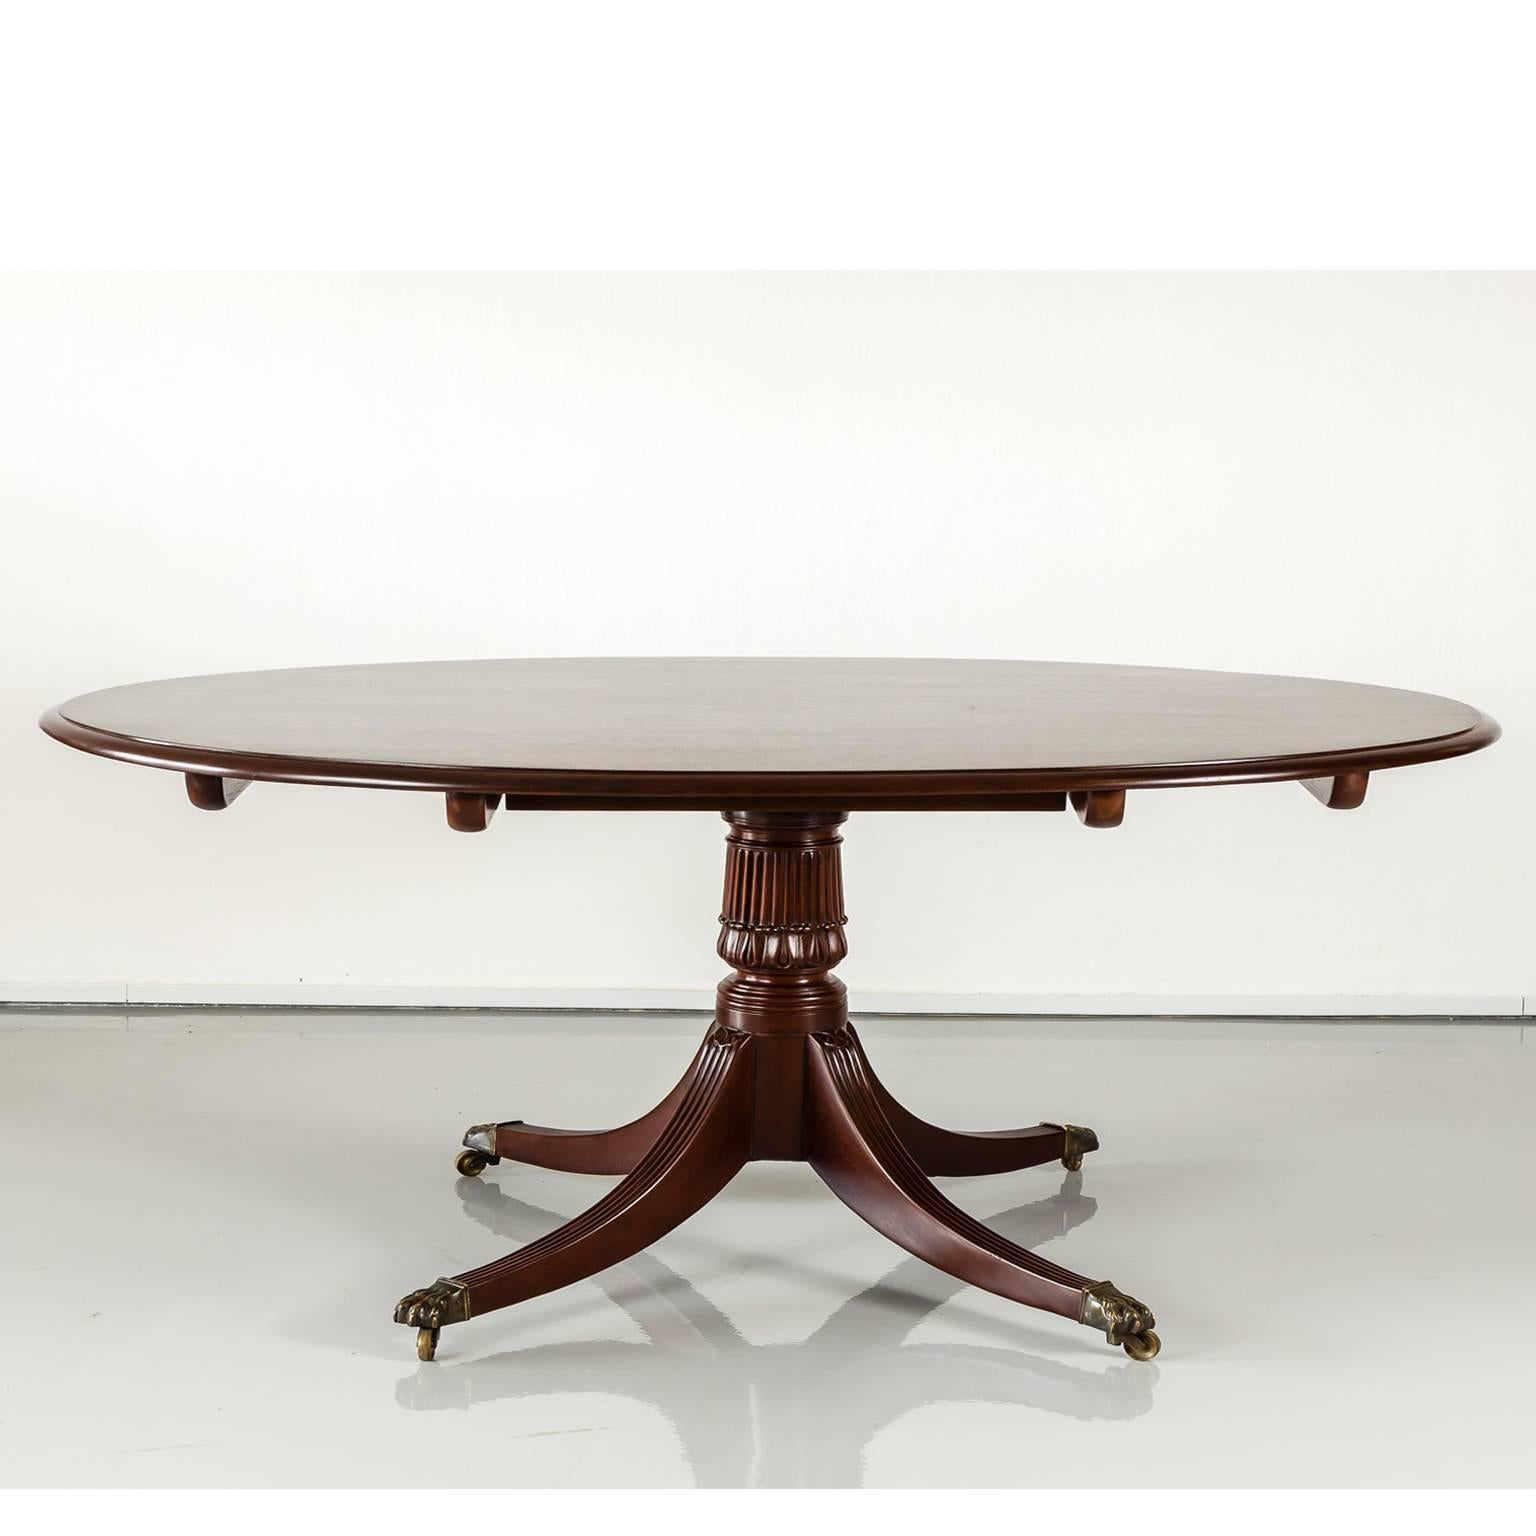 An elegant and unique Regency style single pedestal tilt-top dining table made of rare and beautiful Cuban mahogany. 
The oval top measures 156 cm x 106 cm (61½” x 41½”) and is made of a single plank(!). The solid base has a sophisticated carved